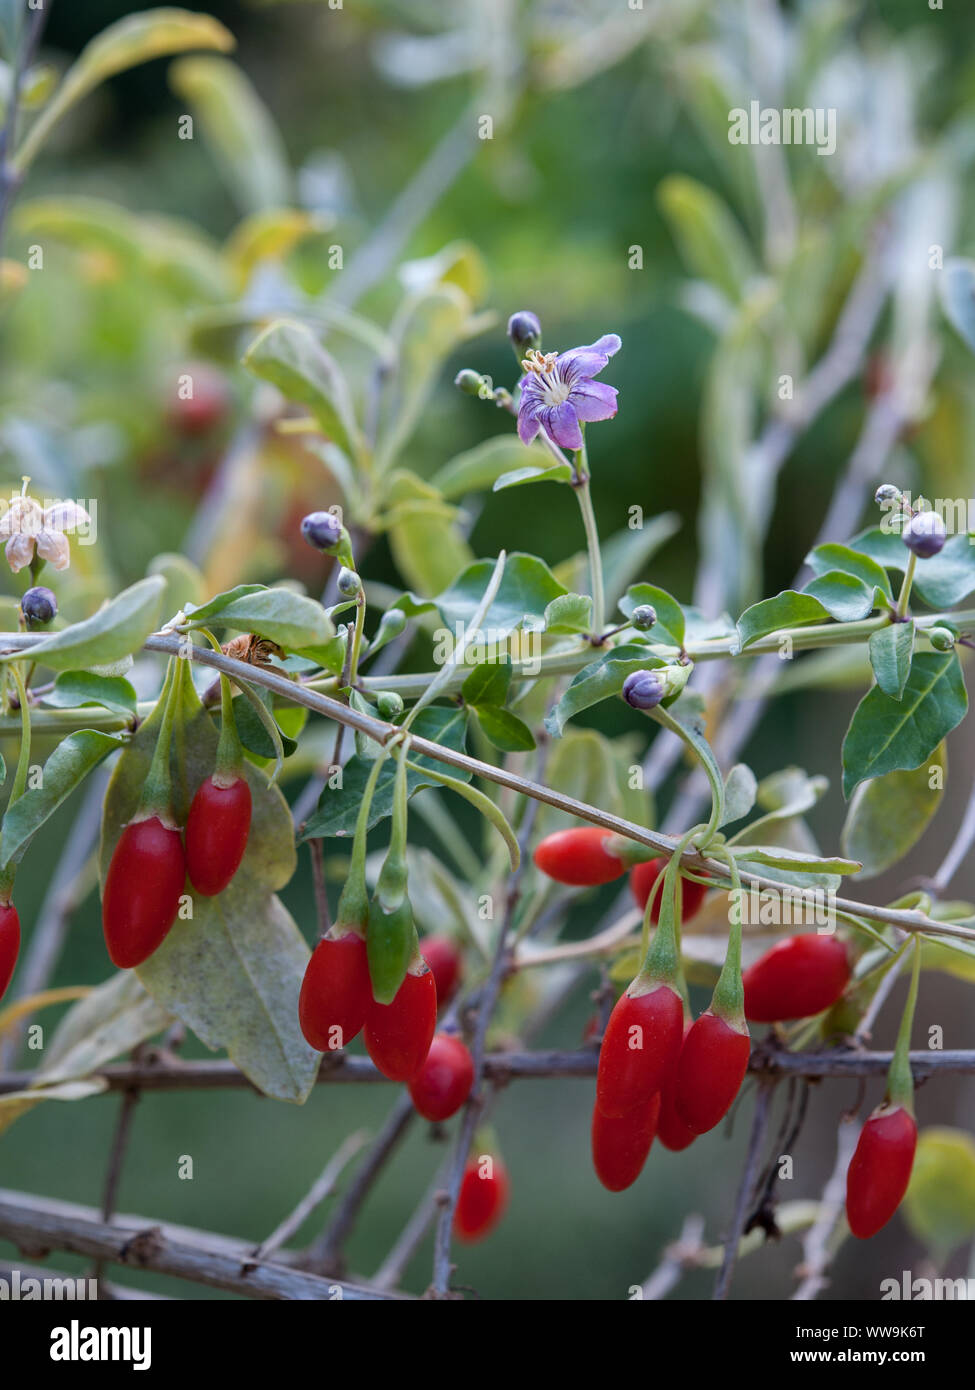 Lycium barbarum plant. Goji berry and derived products became common in developed countries as health foods or alternative medicine remedies. Stock Photo